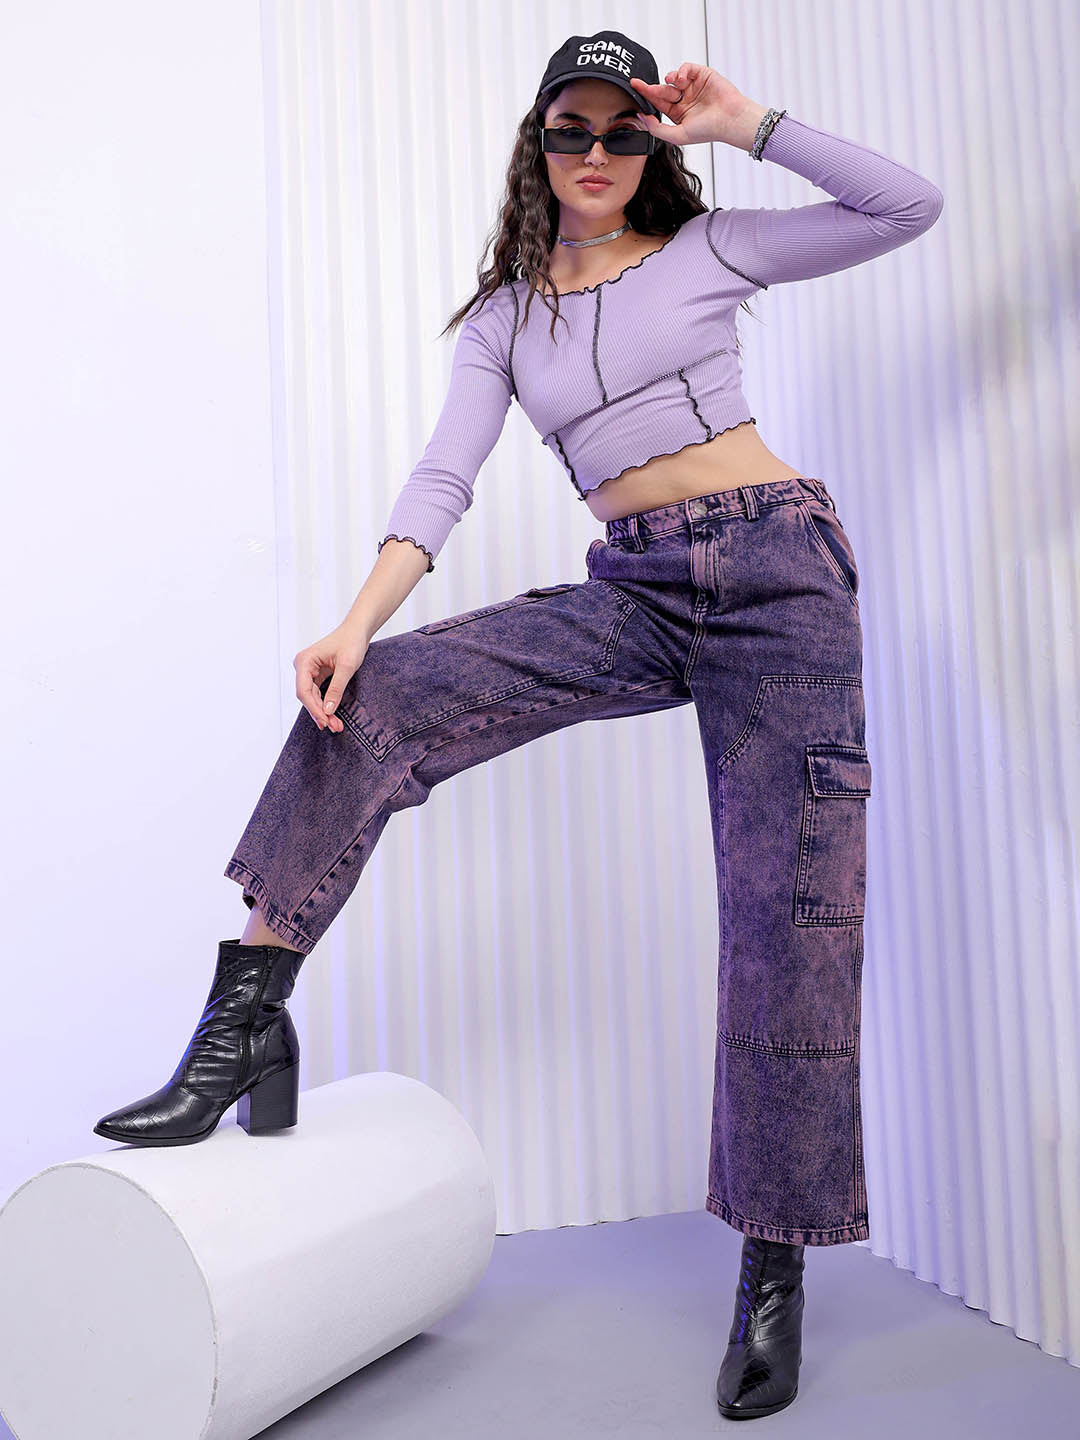 Shop Women Relaxed Fit Jeans Online.